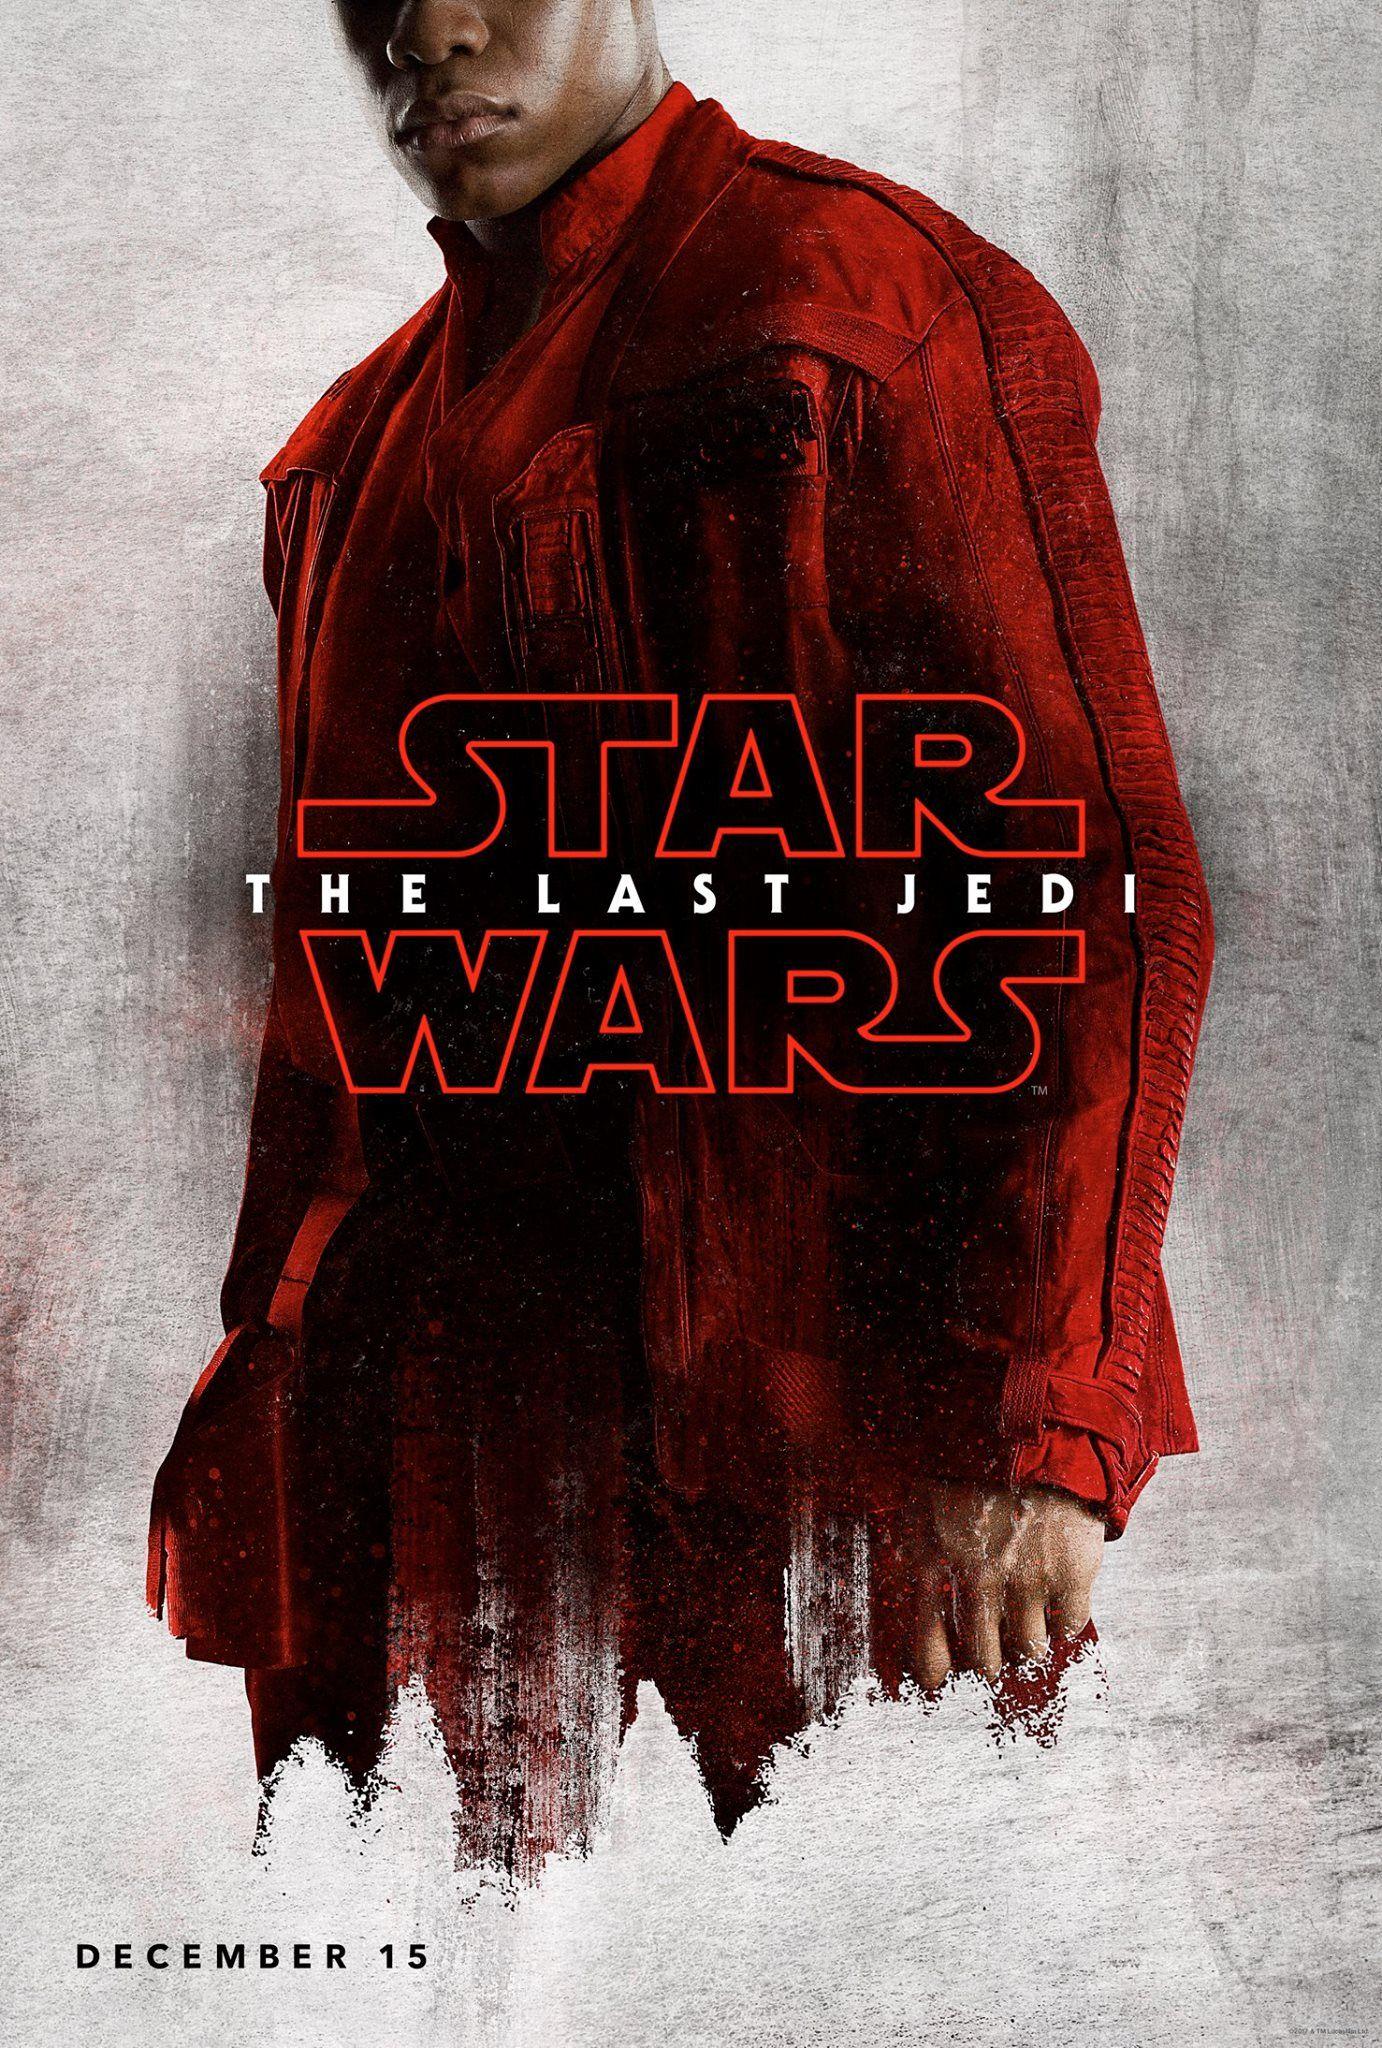 Lucasfilm releases new teaser posters for Star Wars: The Last Jedi